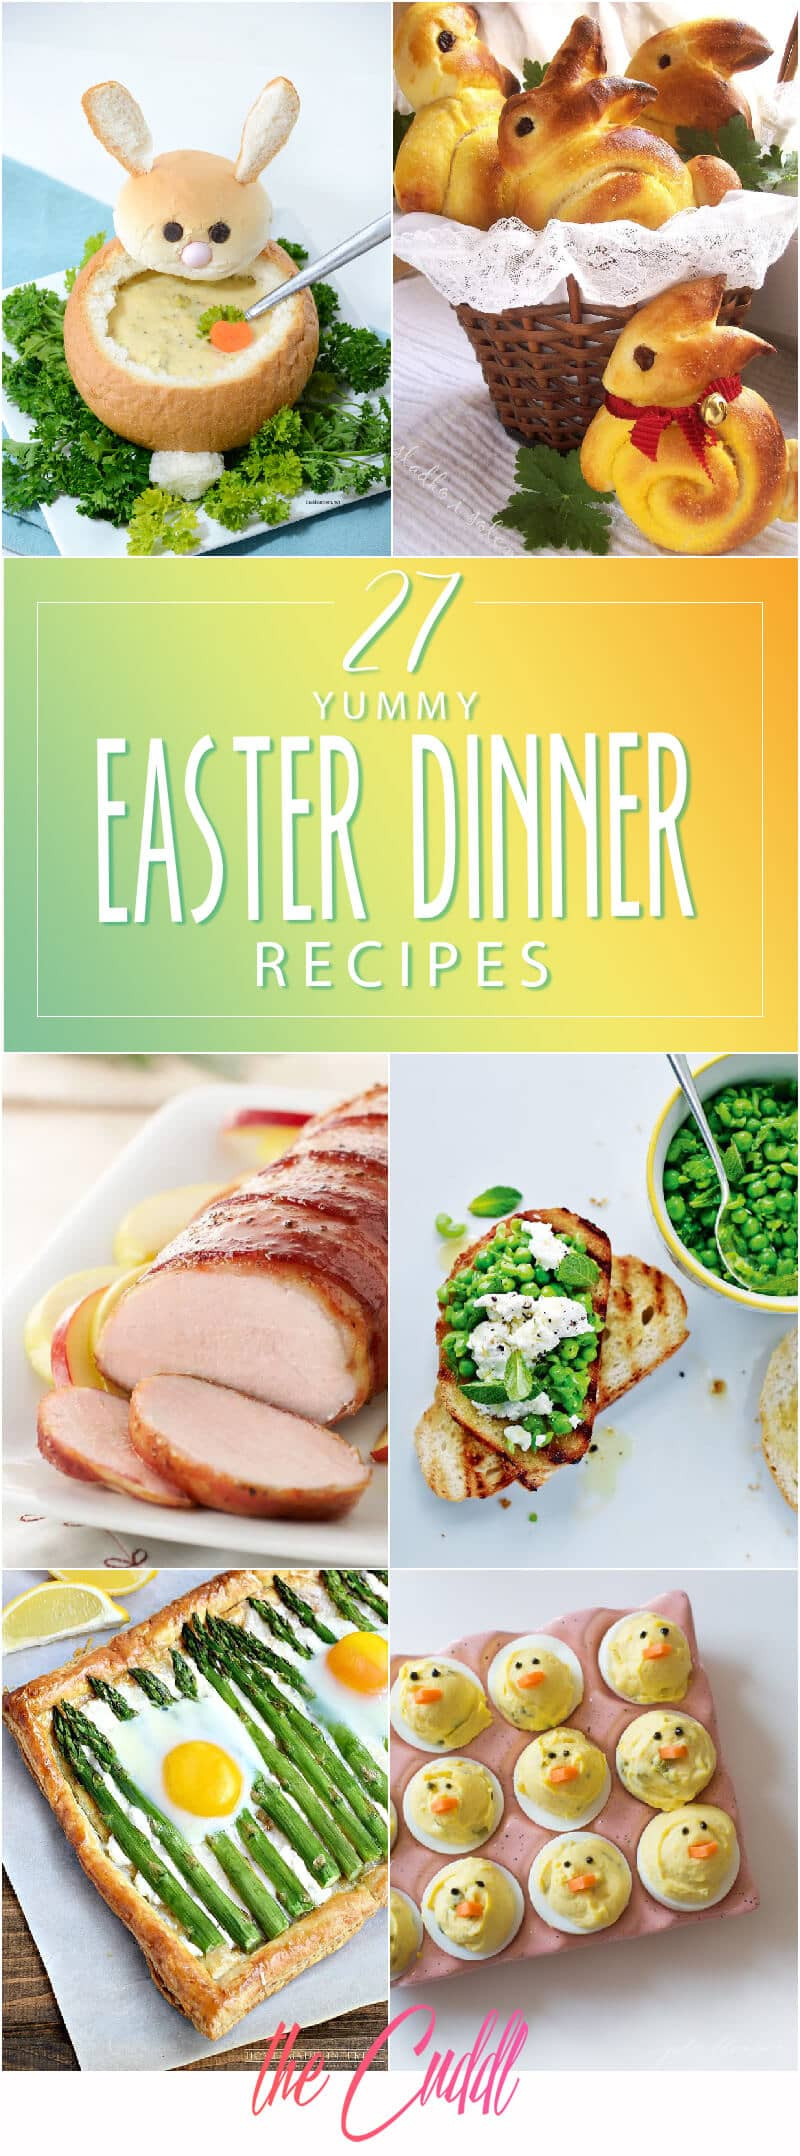 Easter Dinner For A Crowd
 27 Yummy Easter Dinner Ideas to Wow Your Guests